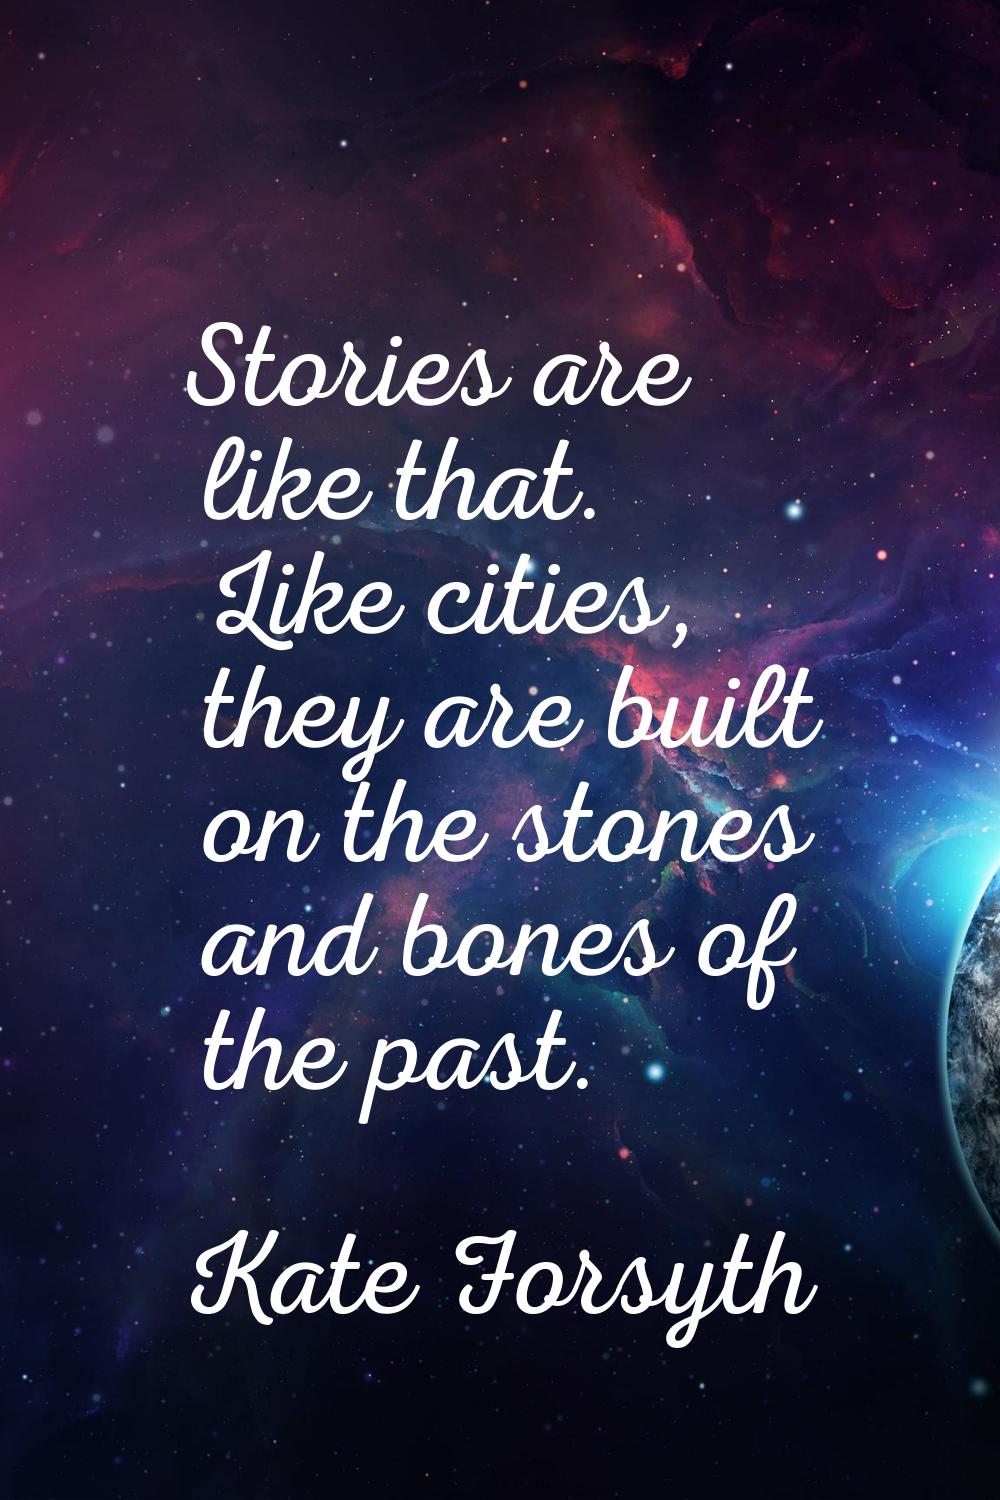 Stories are like that. Like cities, they are built on the stones and bones of the past.